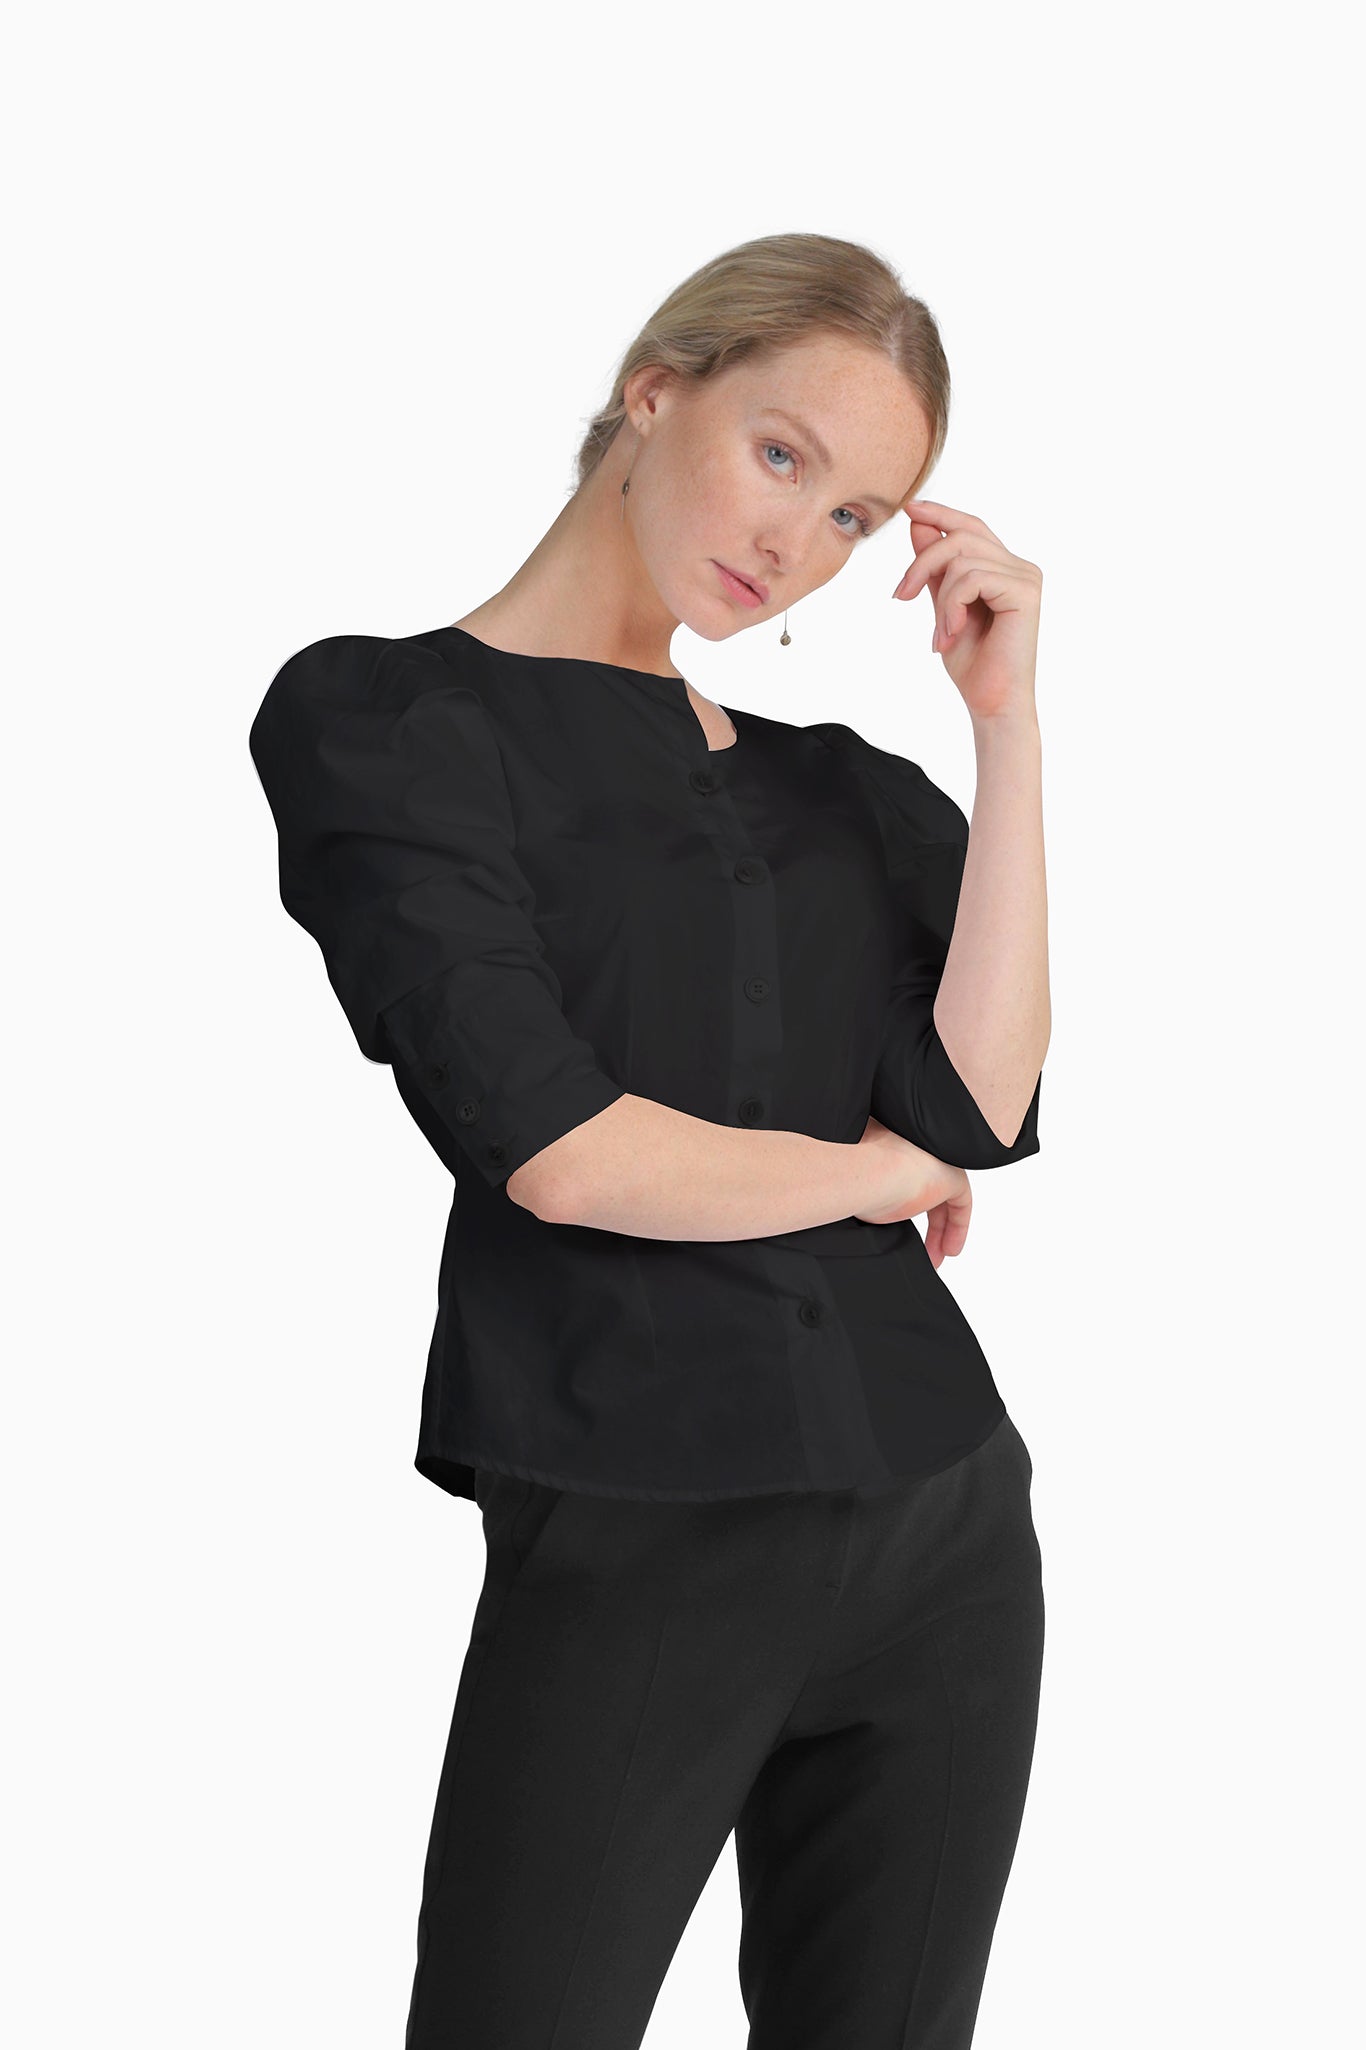 Seragyi's Martina Blouse in Black, made from sustainable cotton. With a modern asymmetrical neckline and ruched sleeves, this elegant design is a must-have in Women's Clothing.